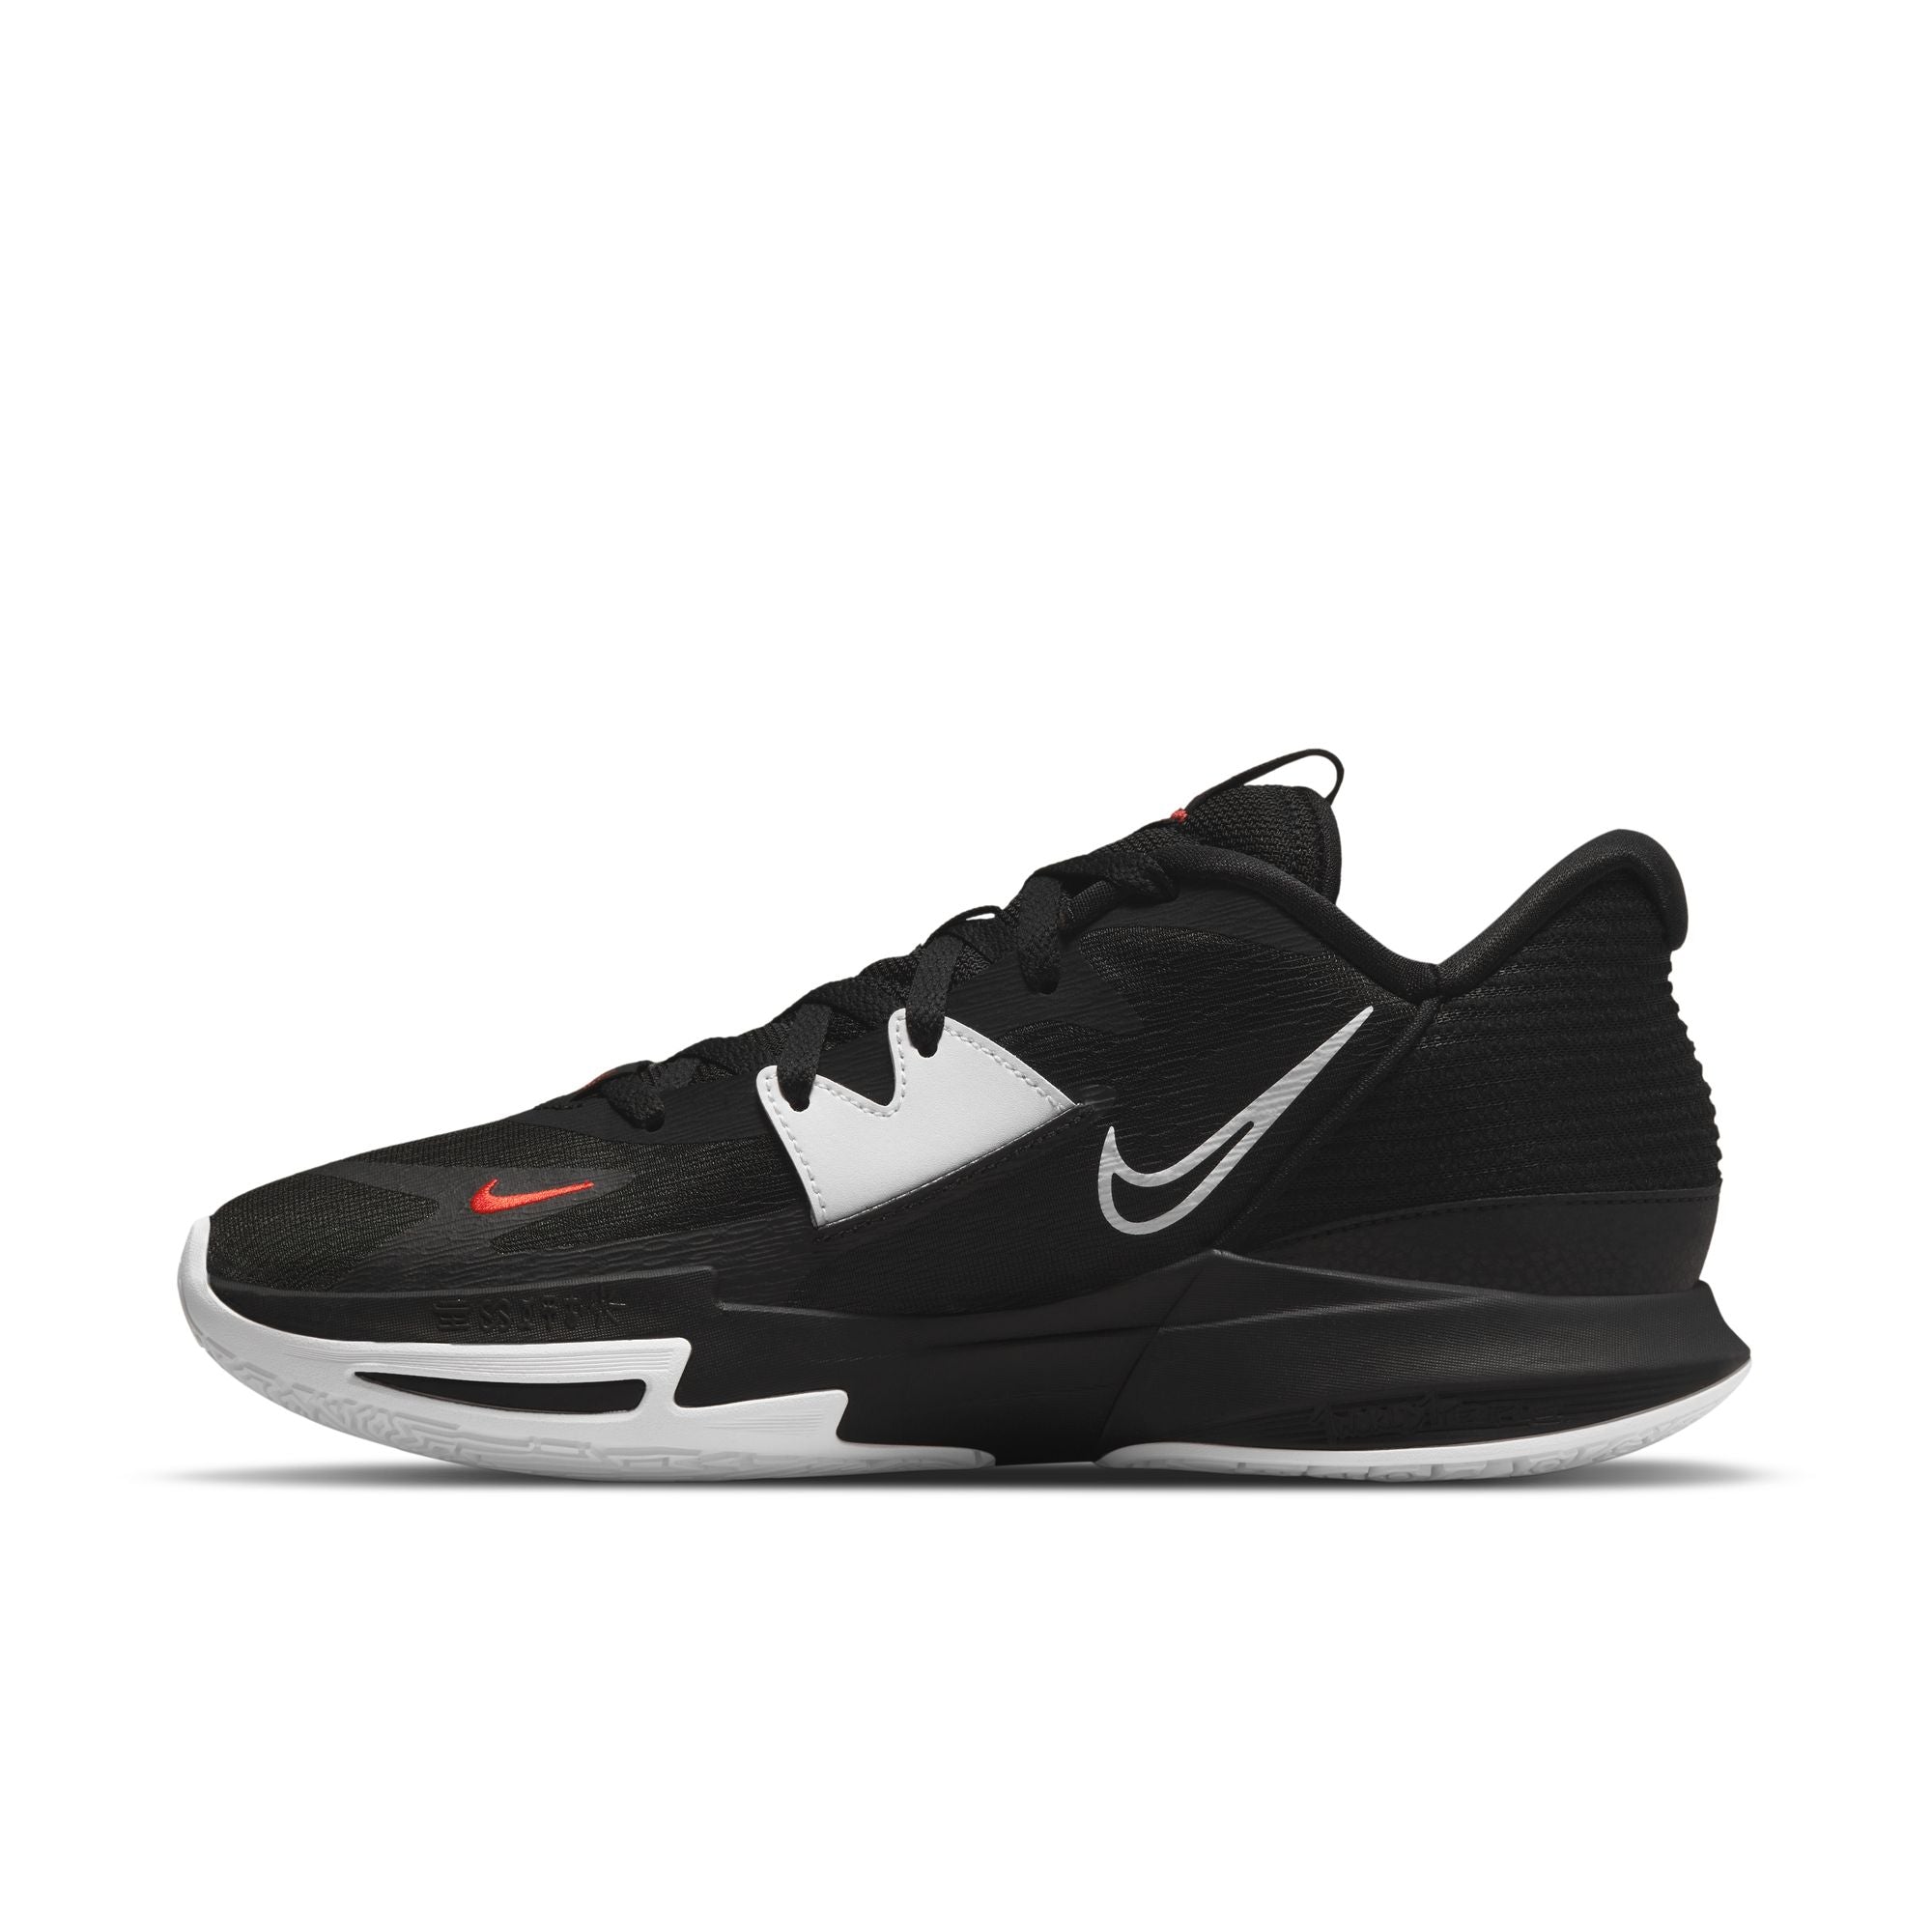 Mens Kyrie Low 5 Basketball Shoe